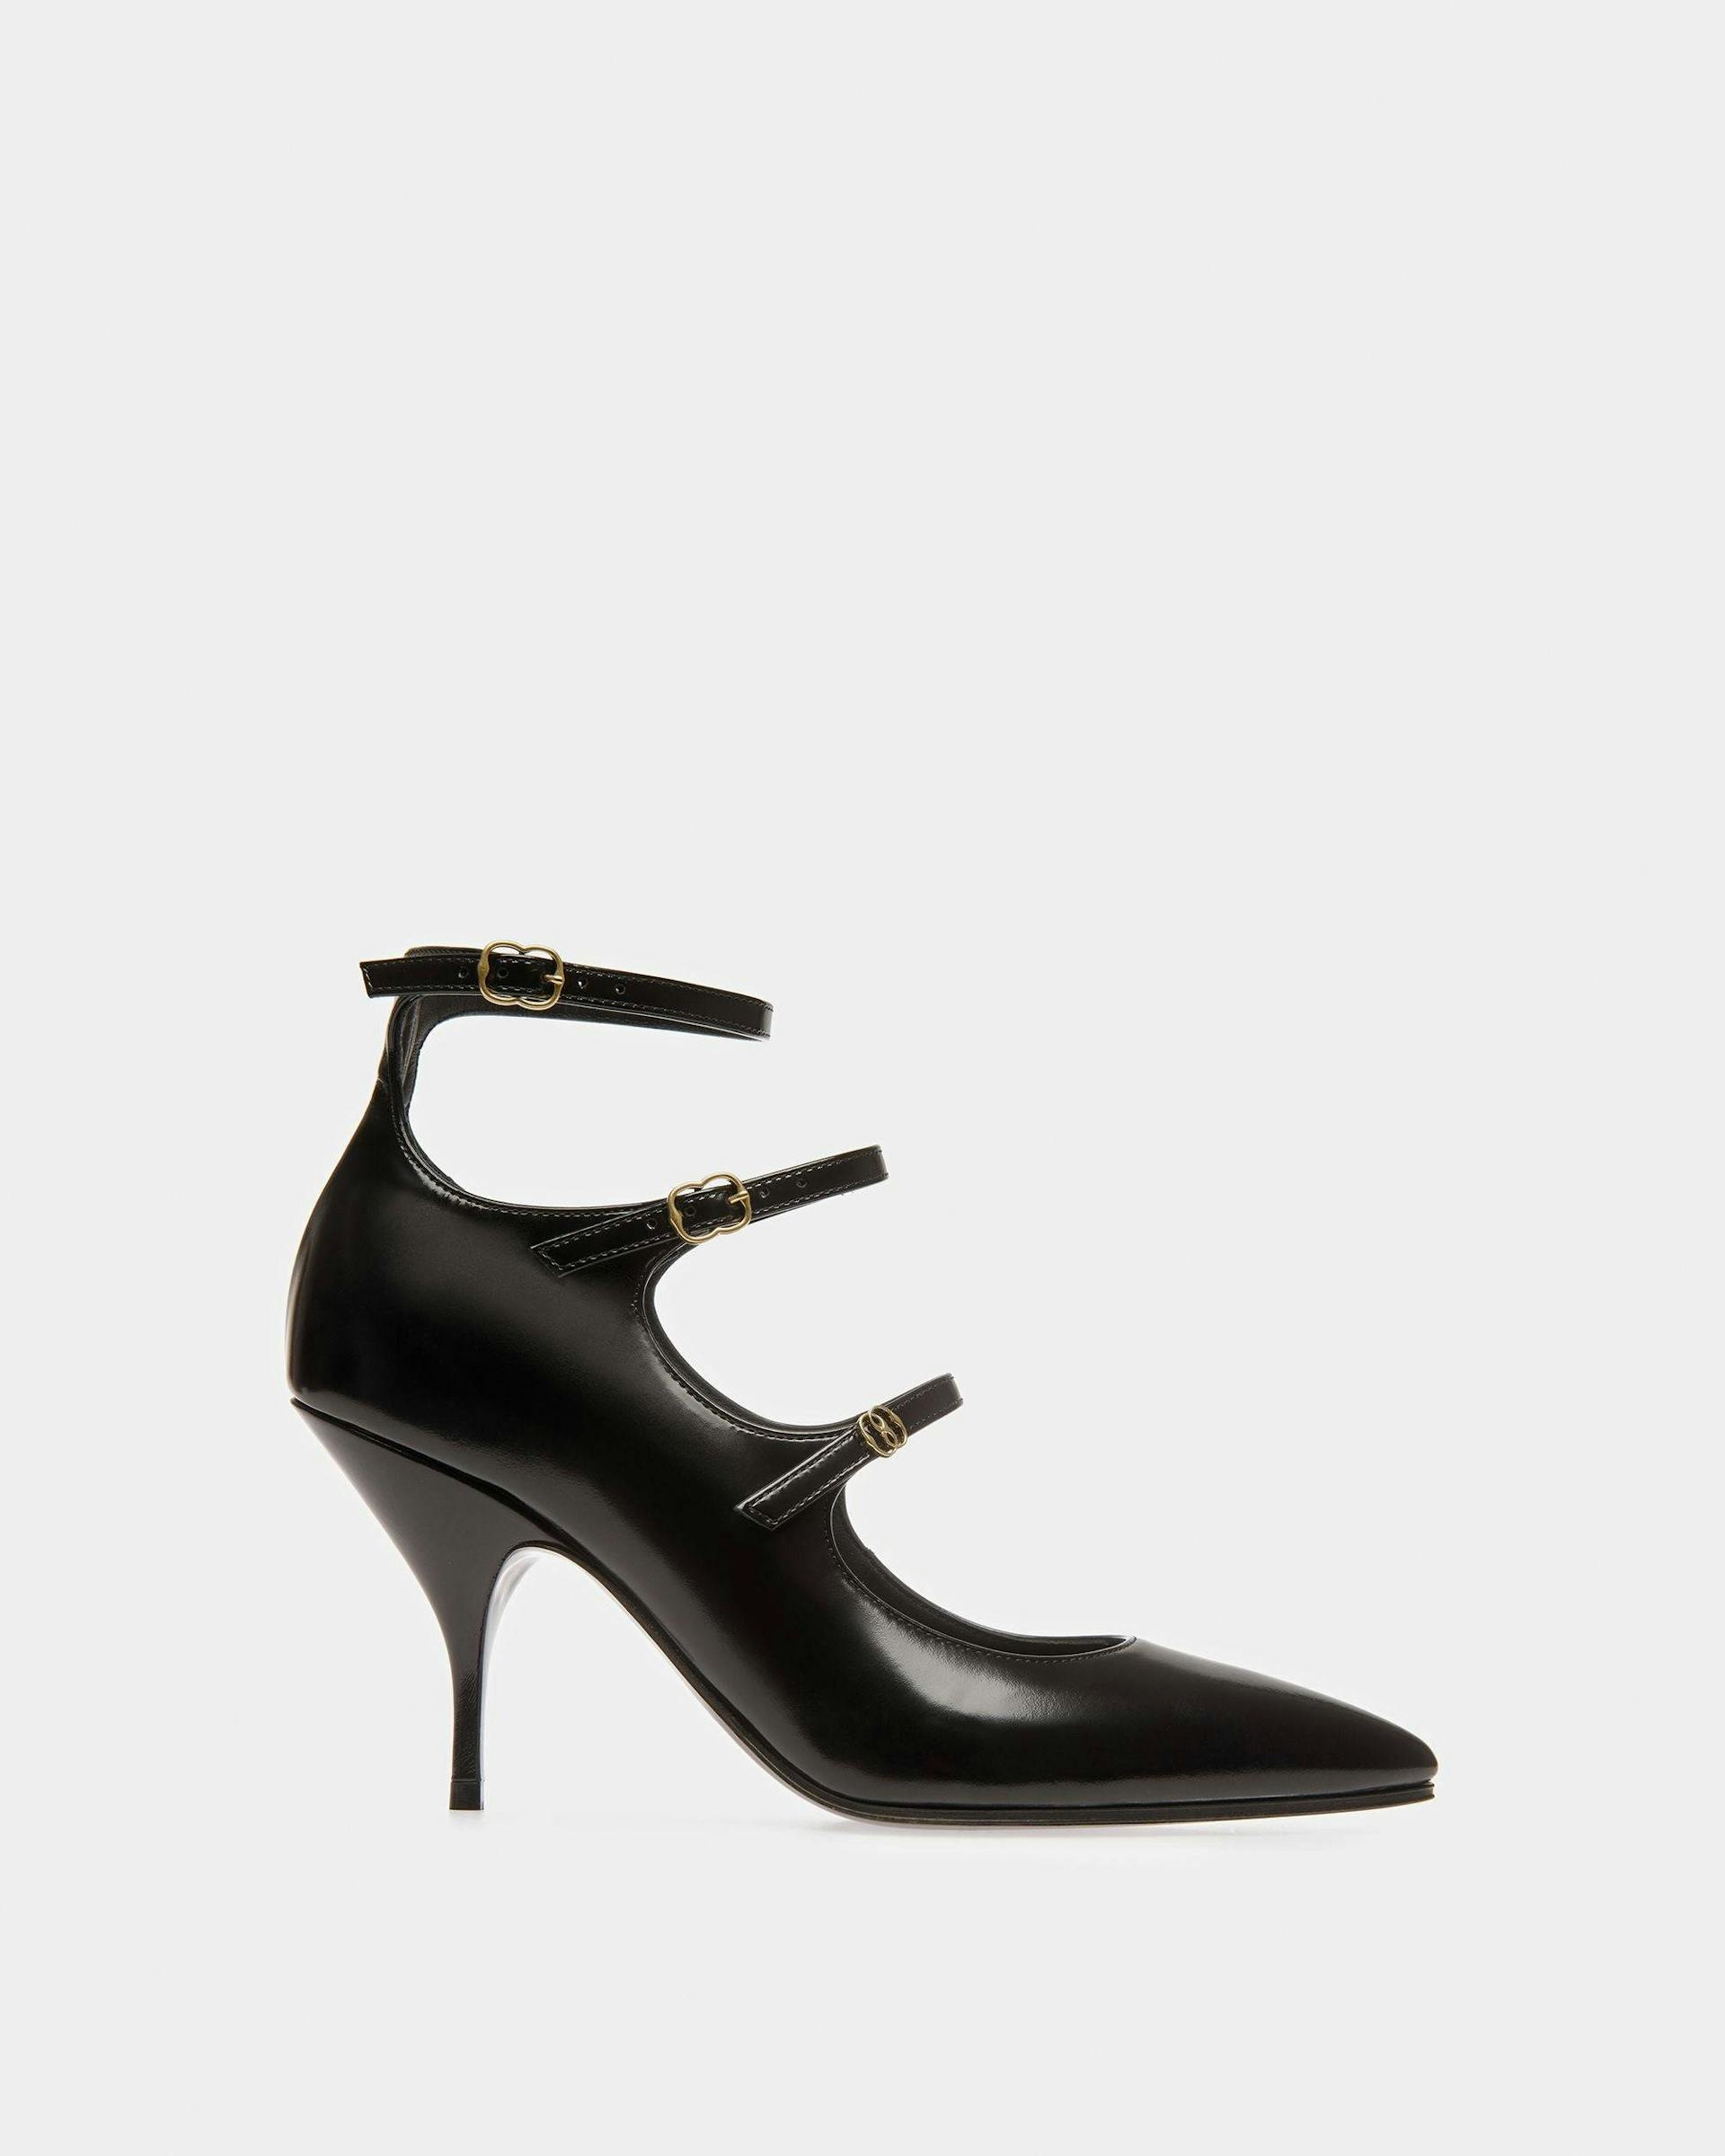 Marilou Pumps In Black Leather - Women's - Bally - 01